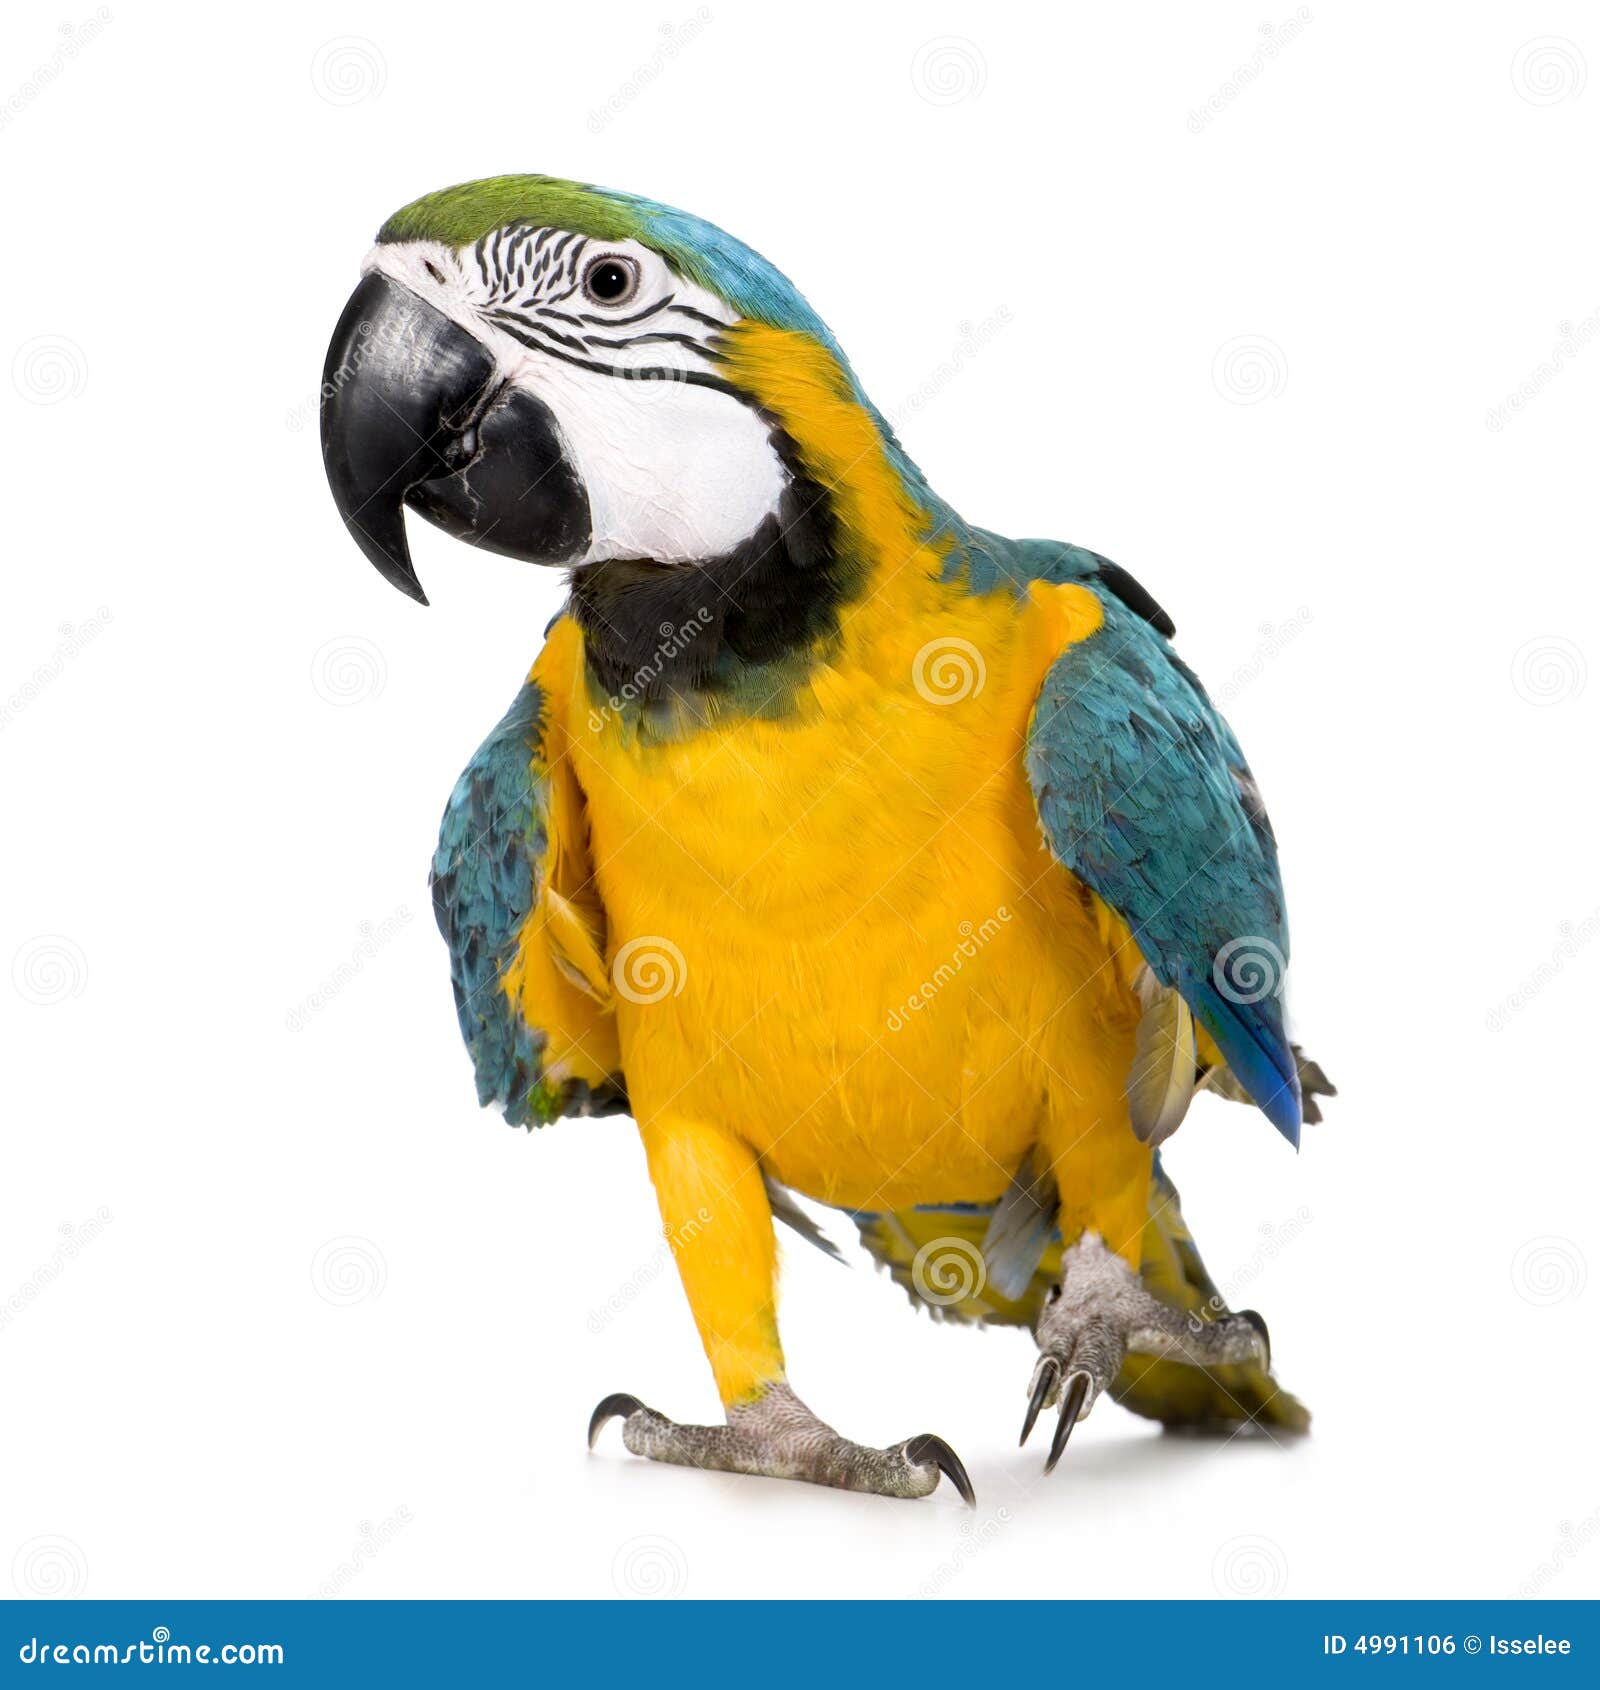 young blue-and-yellow macaw